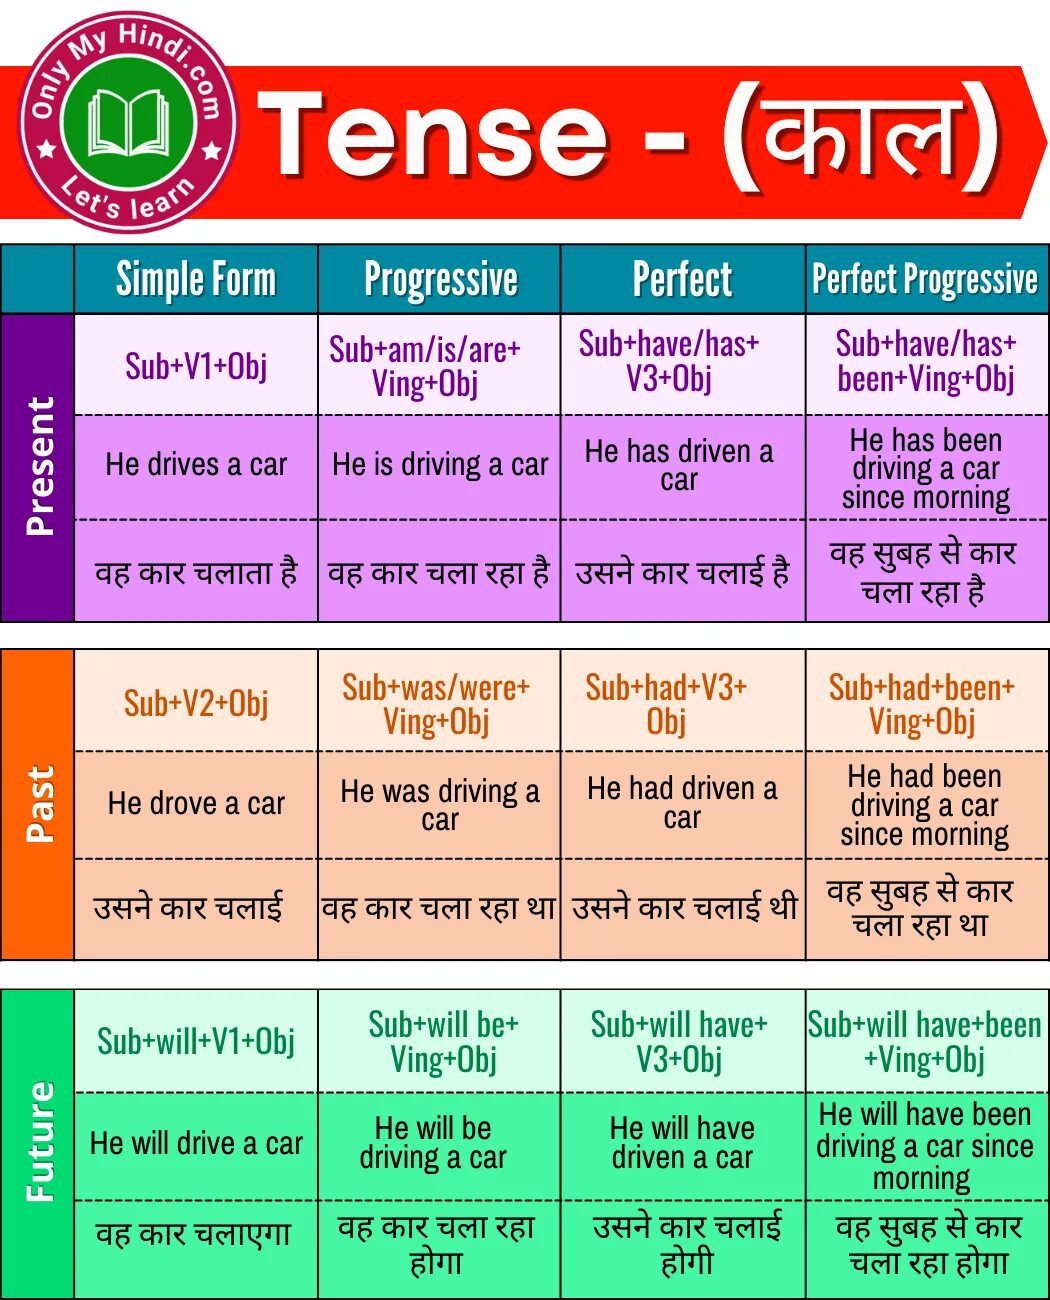 1 the perfect tense forms. English Tenses таблица. Table of English Tenses таблица. Continuous Tenses таблица. Grammar Tenses таблица.